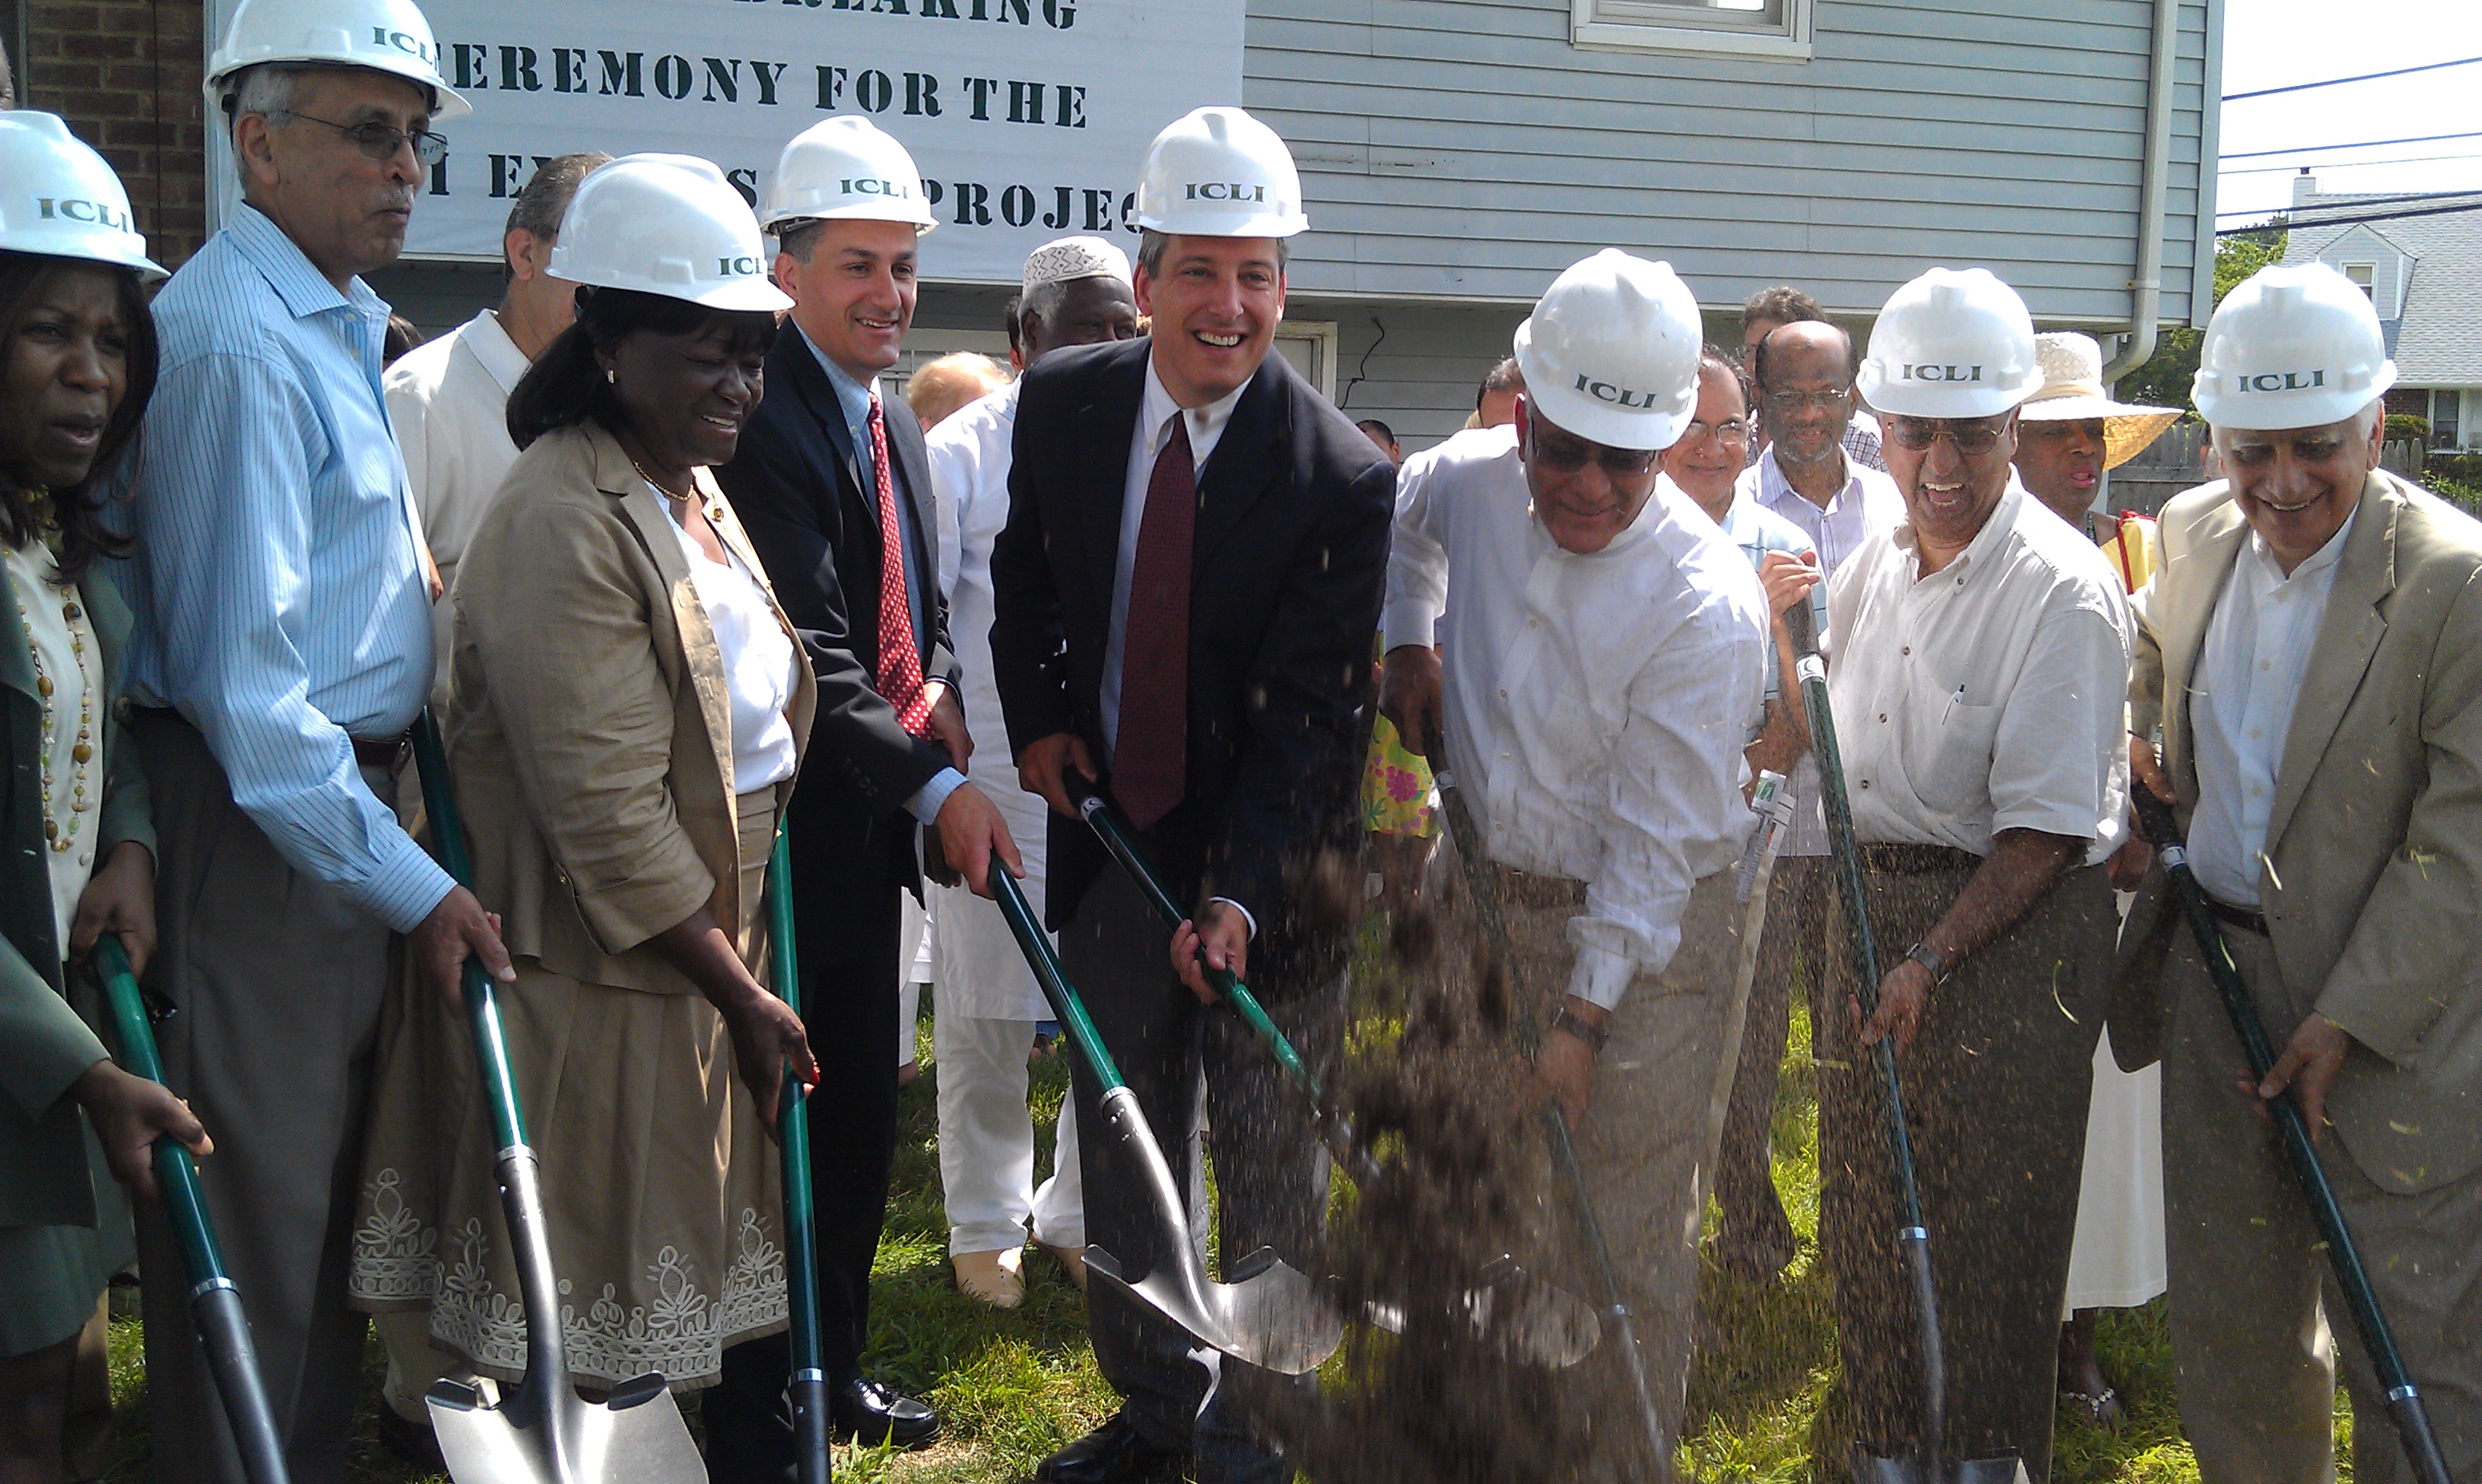 Elected officials and members of the Islamic Center of Long Island break ground on new expansion project that plans to add classrooms and additional parking in near future. (Picture by: Rashed Mian)